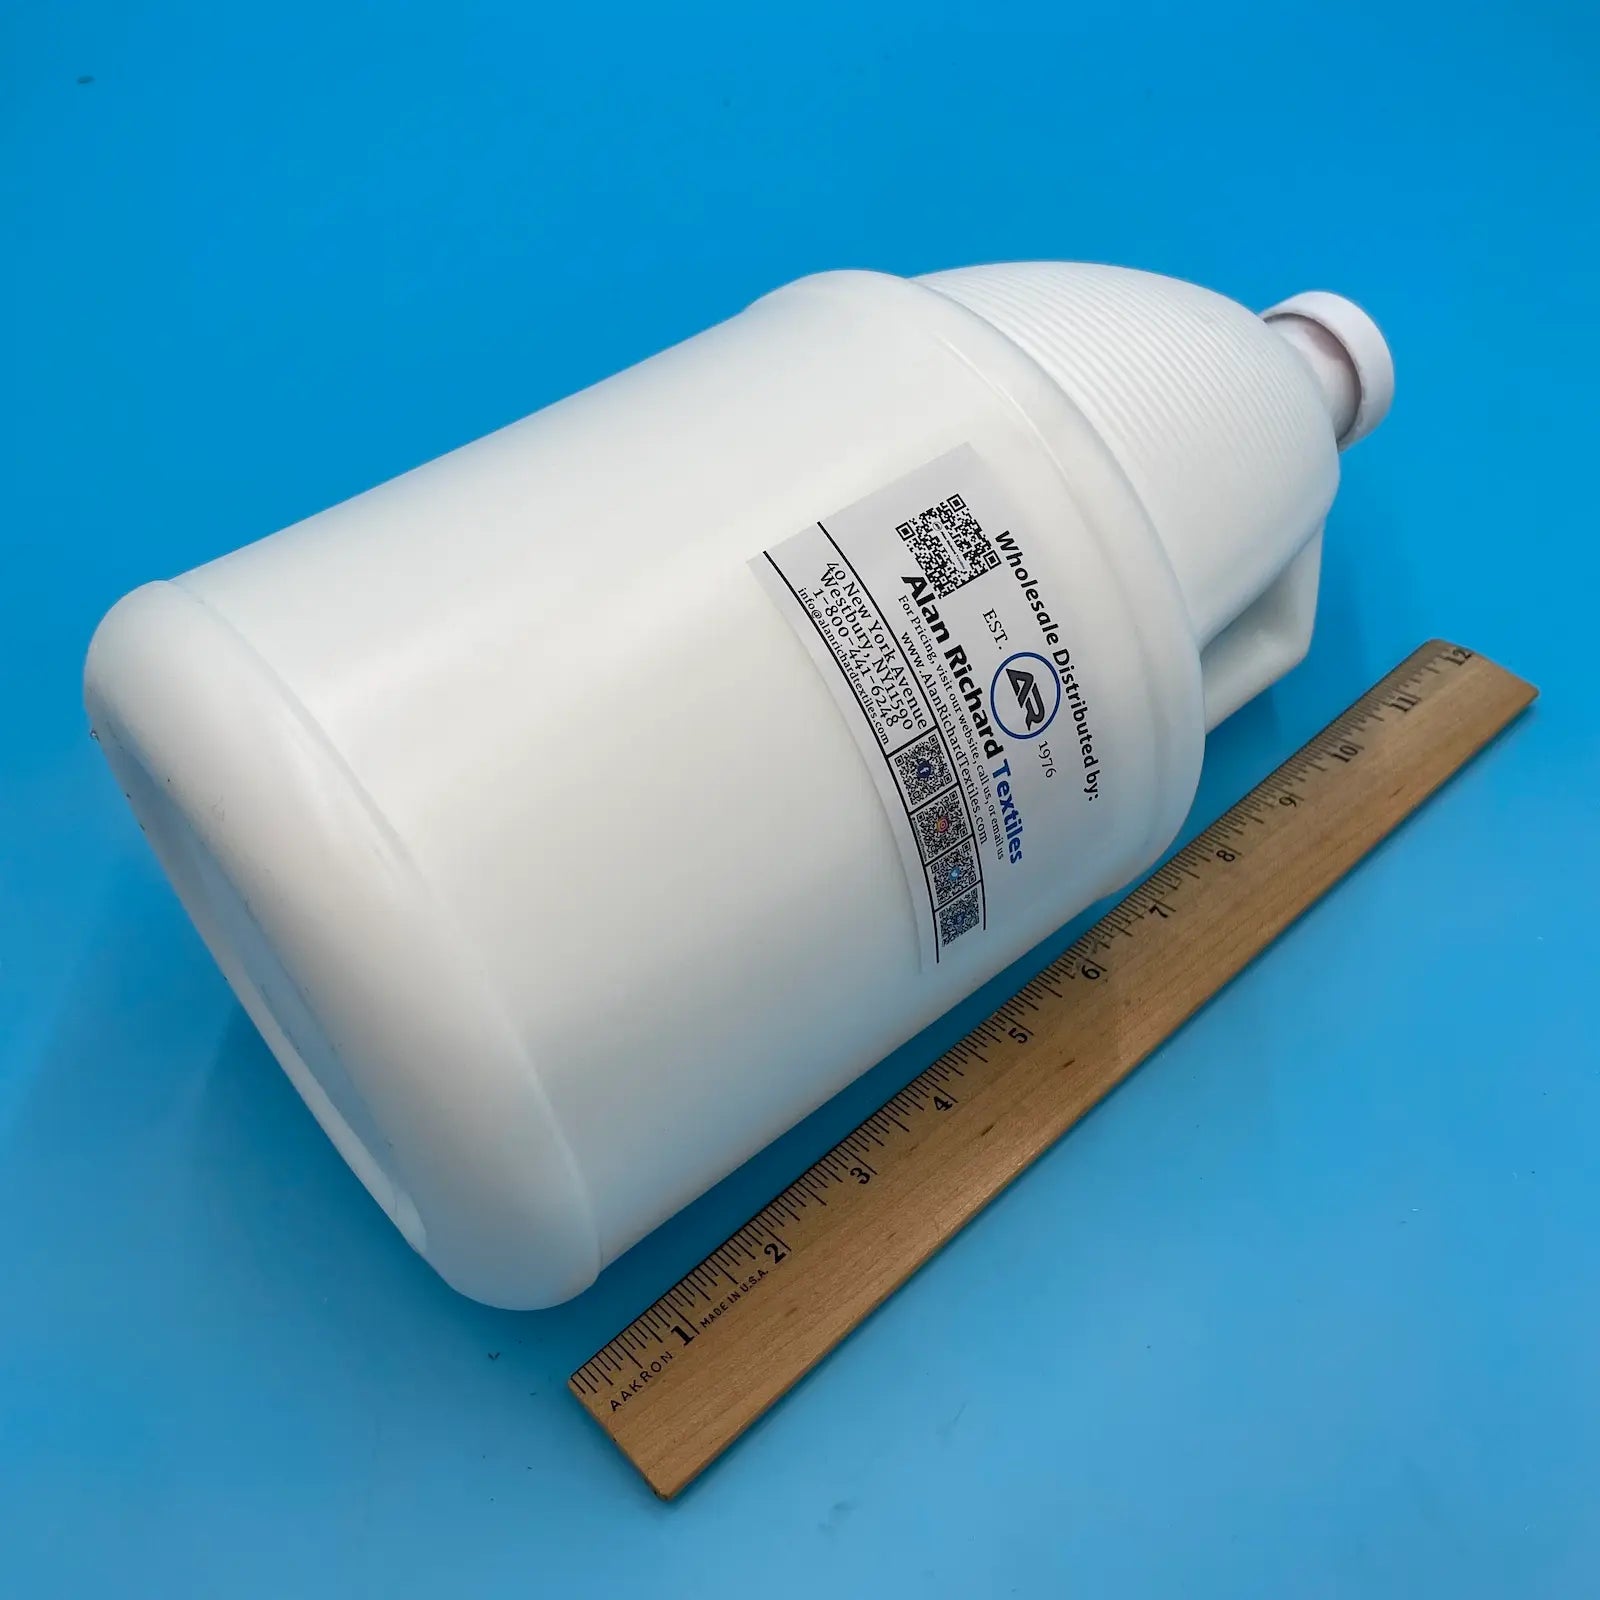 Fringe Adhesive - One Gallon Container